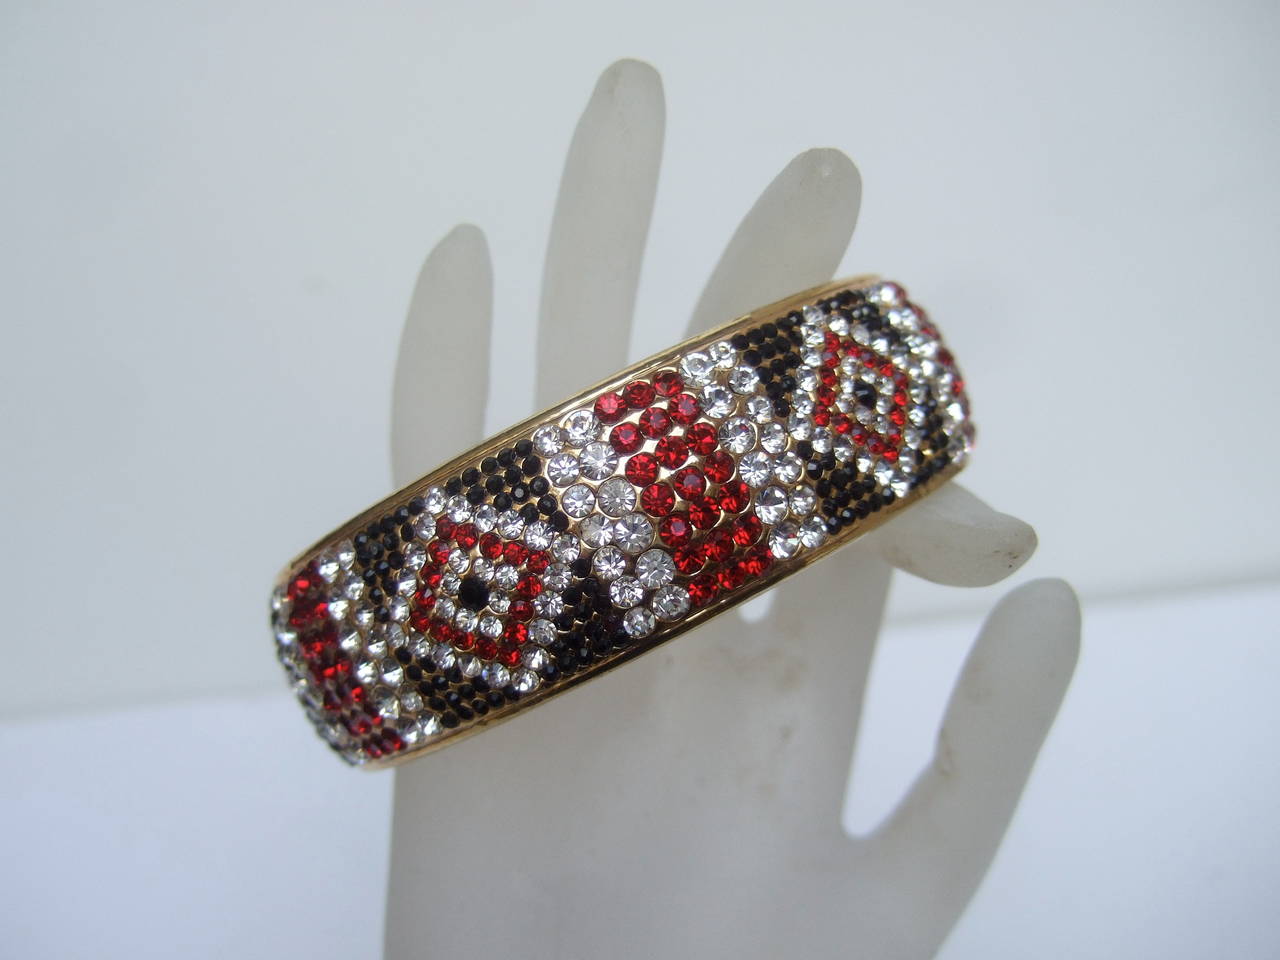 Bob Mackie Crystal encrusted bangle bracelet. The elegant art deco inspired bracelet is embellished with brilliant ruby, jet & diamante crystals
The glittering crystals are designed in severe geometric patterns

The interior band is sheathed in